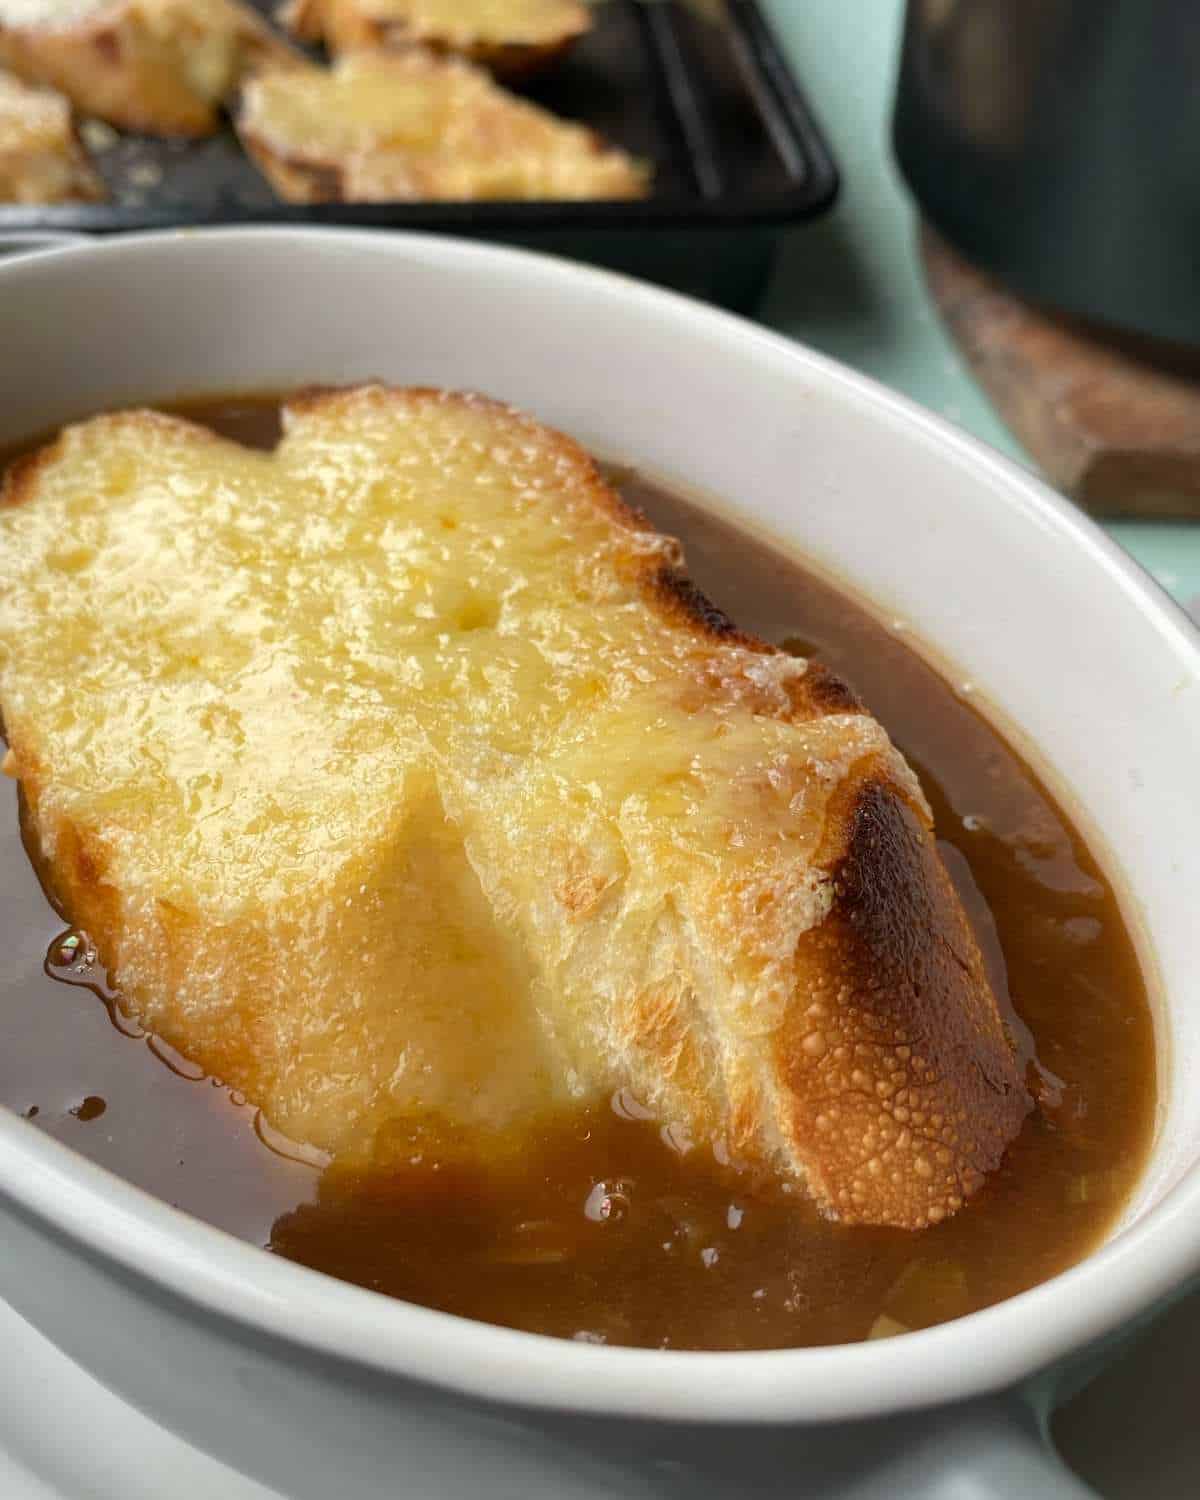 French onion soup with cheesy bread on top served in a small oven white soup bowl.